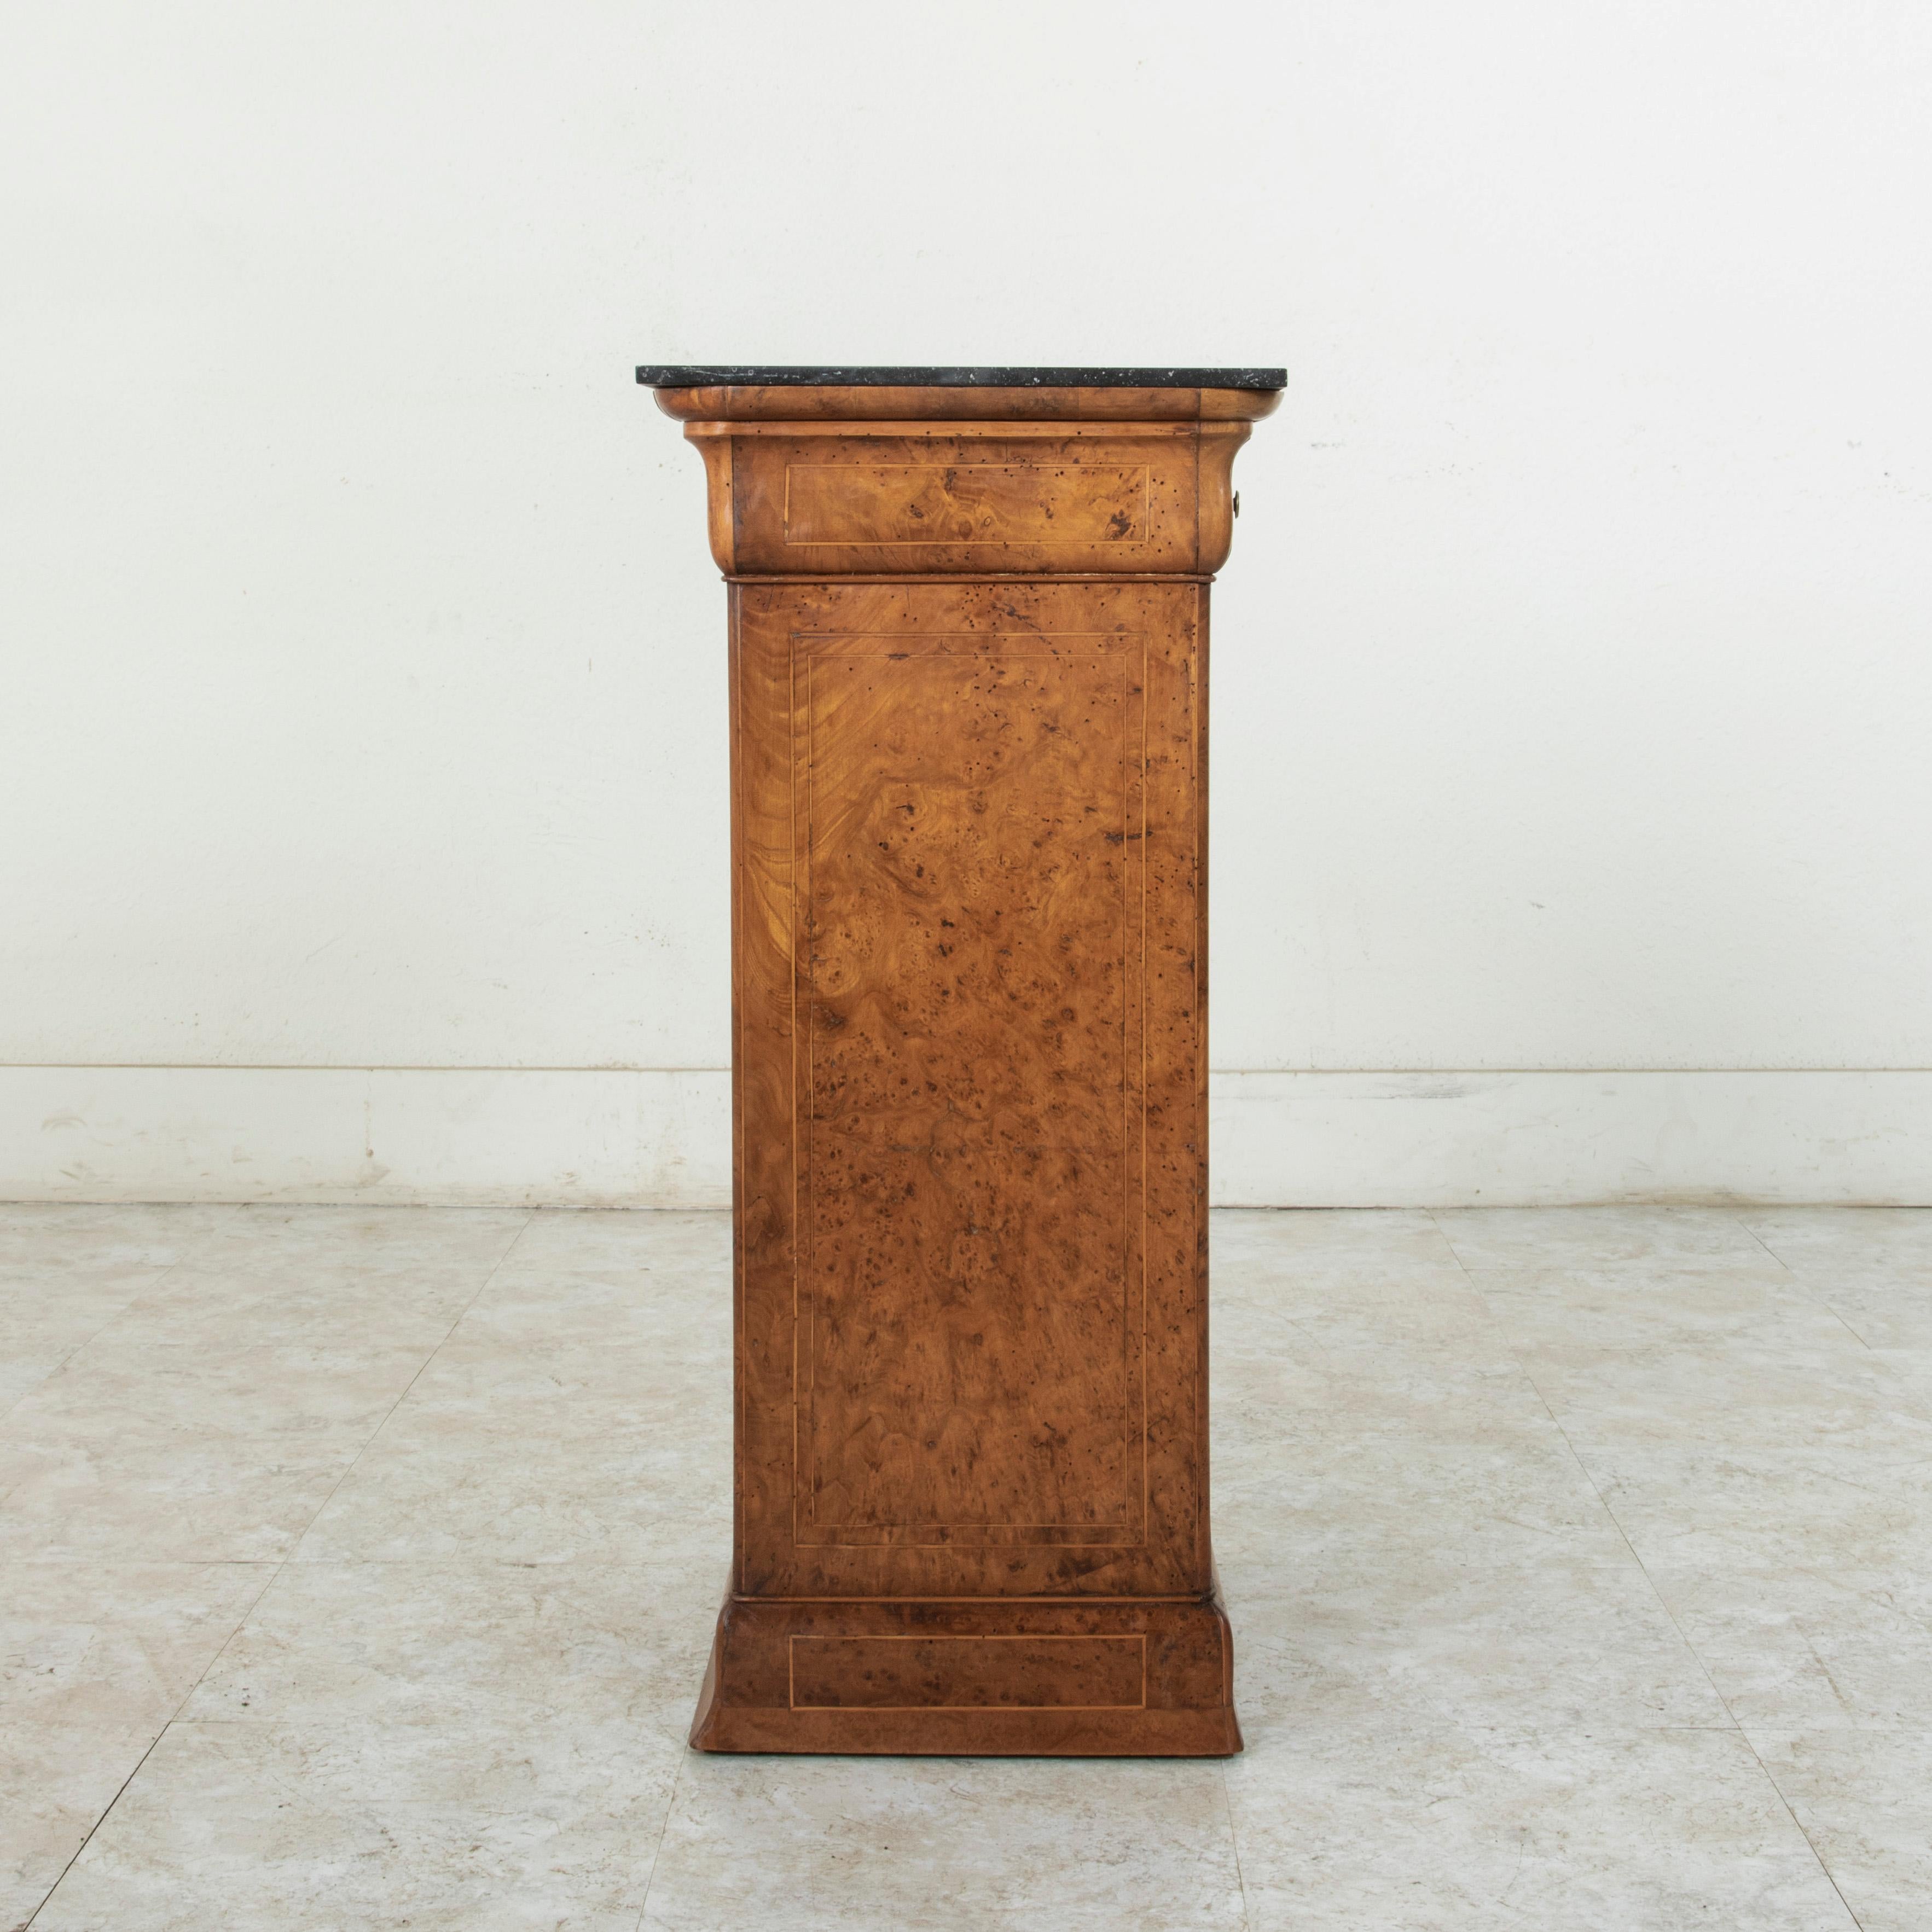 Fruitwood Early 19th Century French Charles X Period Birdseye Maple Nightstand with Marble